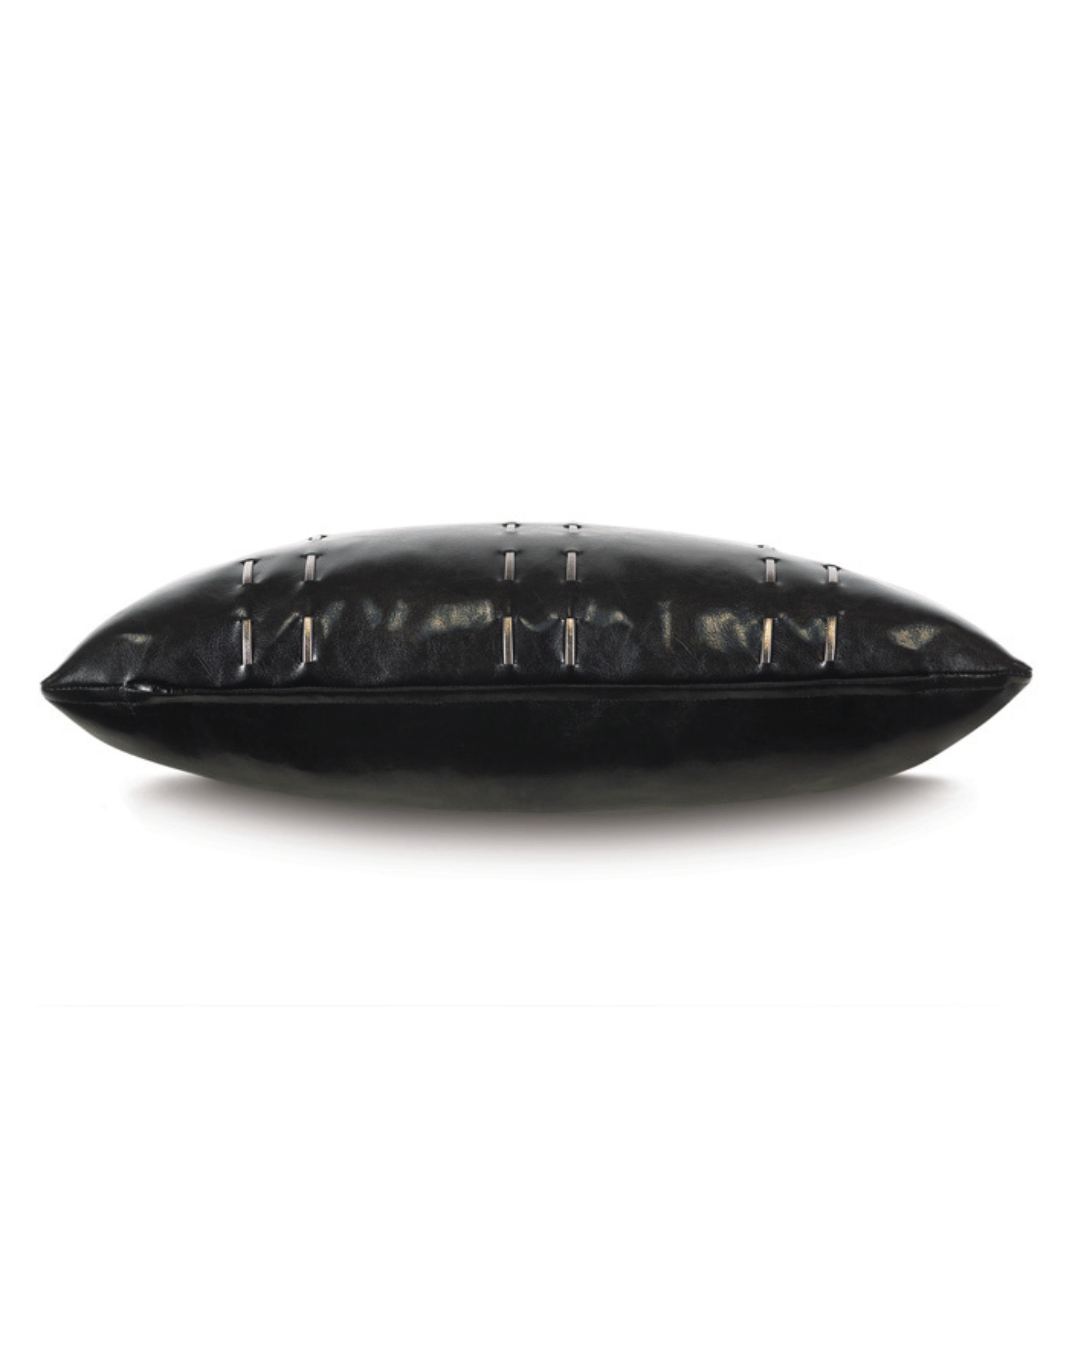 A Muse Pillow by Eastern Accents, a black leather bolster pillow with a row of metallic studs along its midline, displayed on a white background, designed in Arizona style.